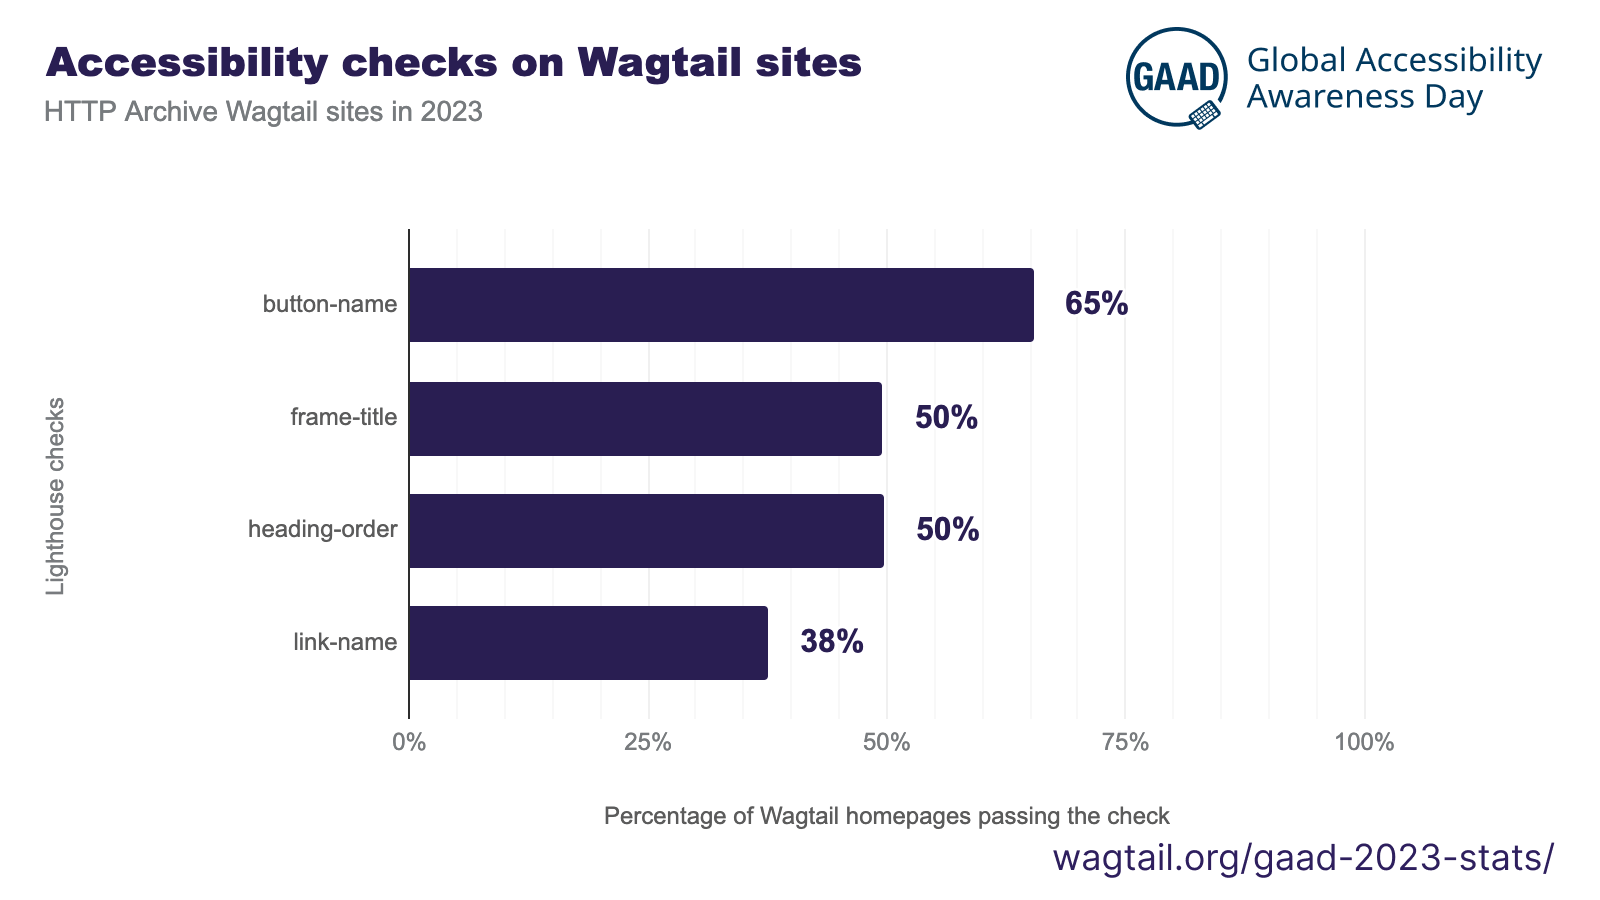 Accessibility checks on Wagtail sites - HTTP Archive Wagtail sites in 2023 - GAAD 2023